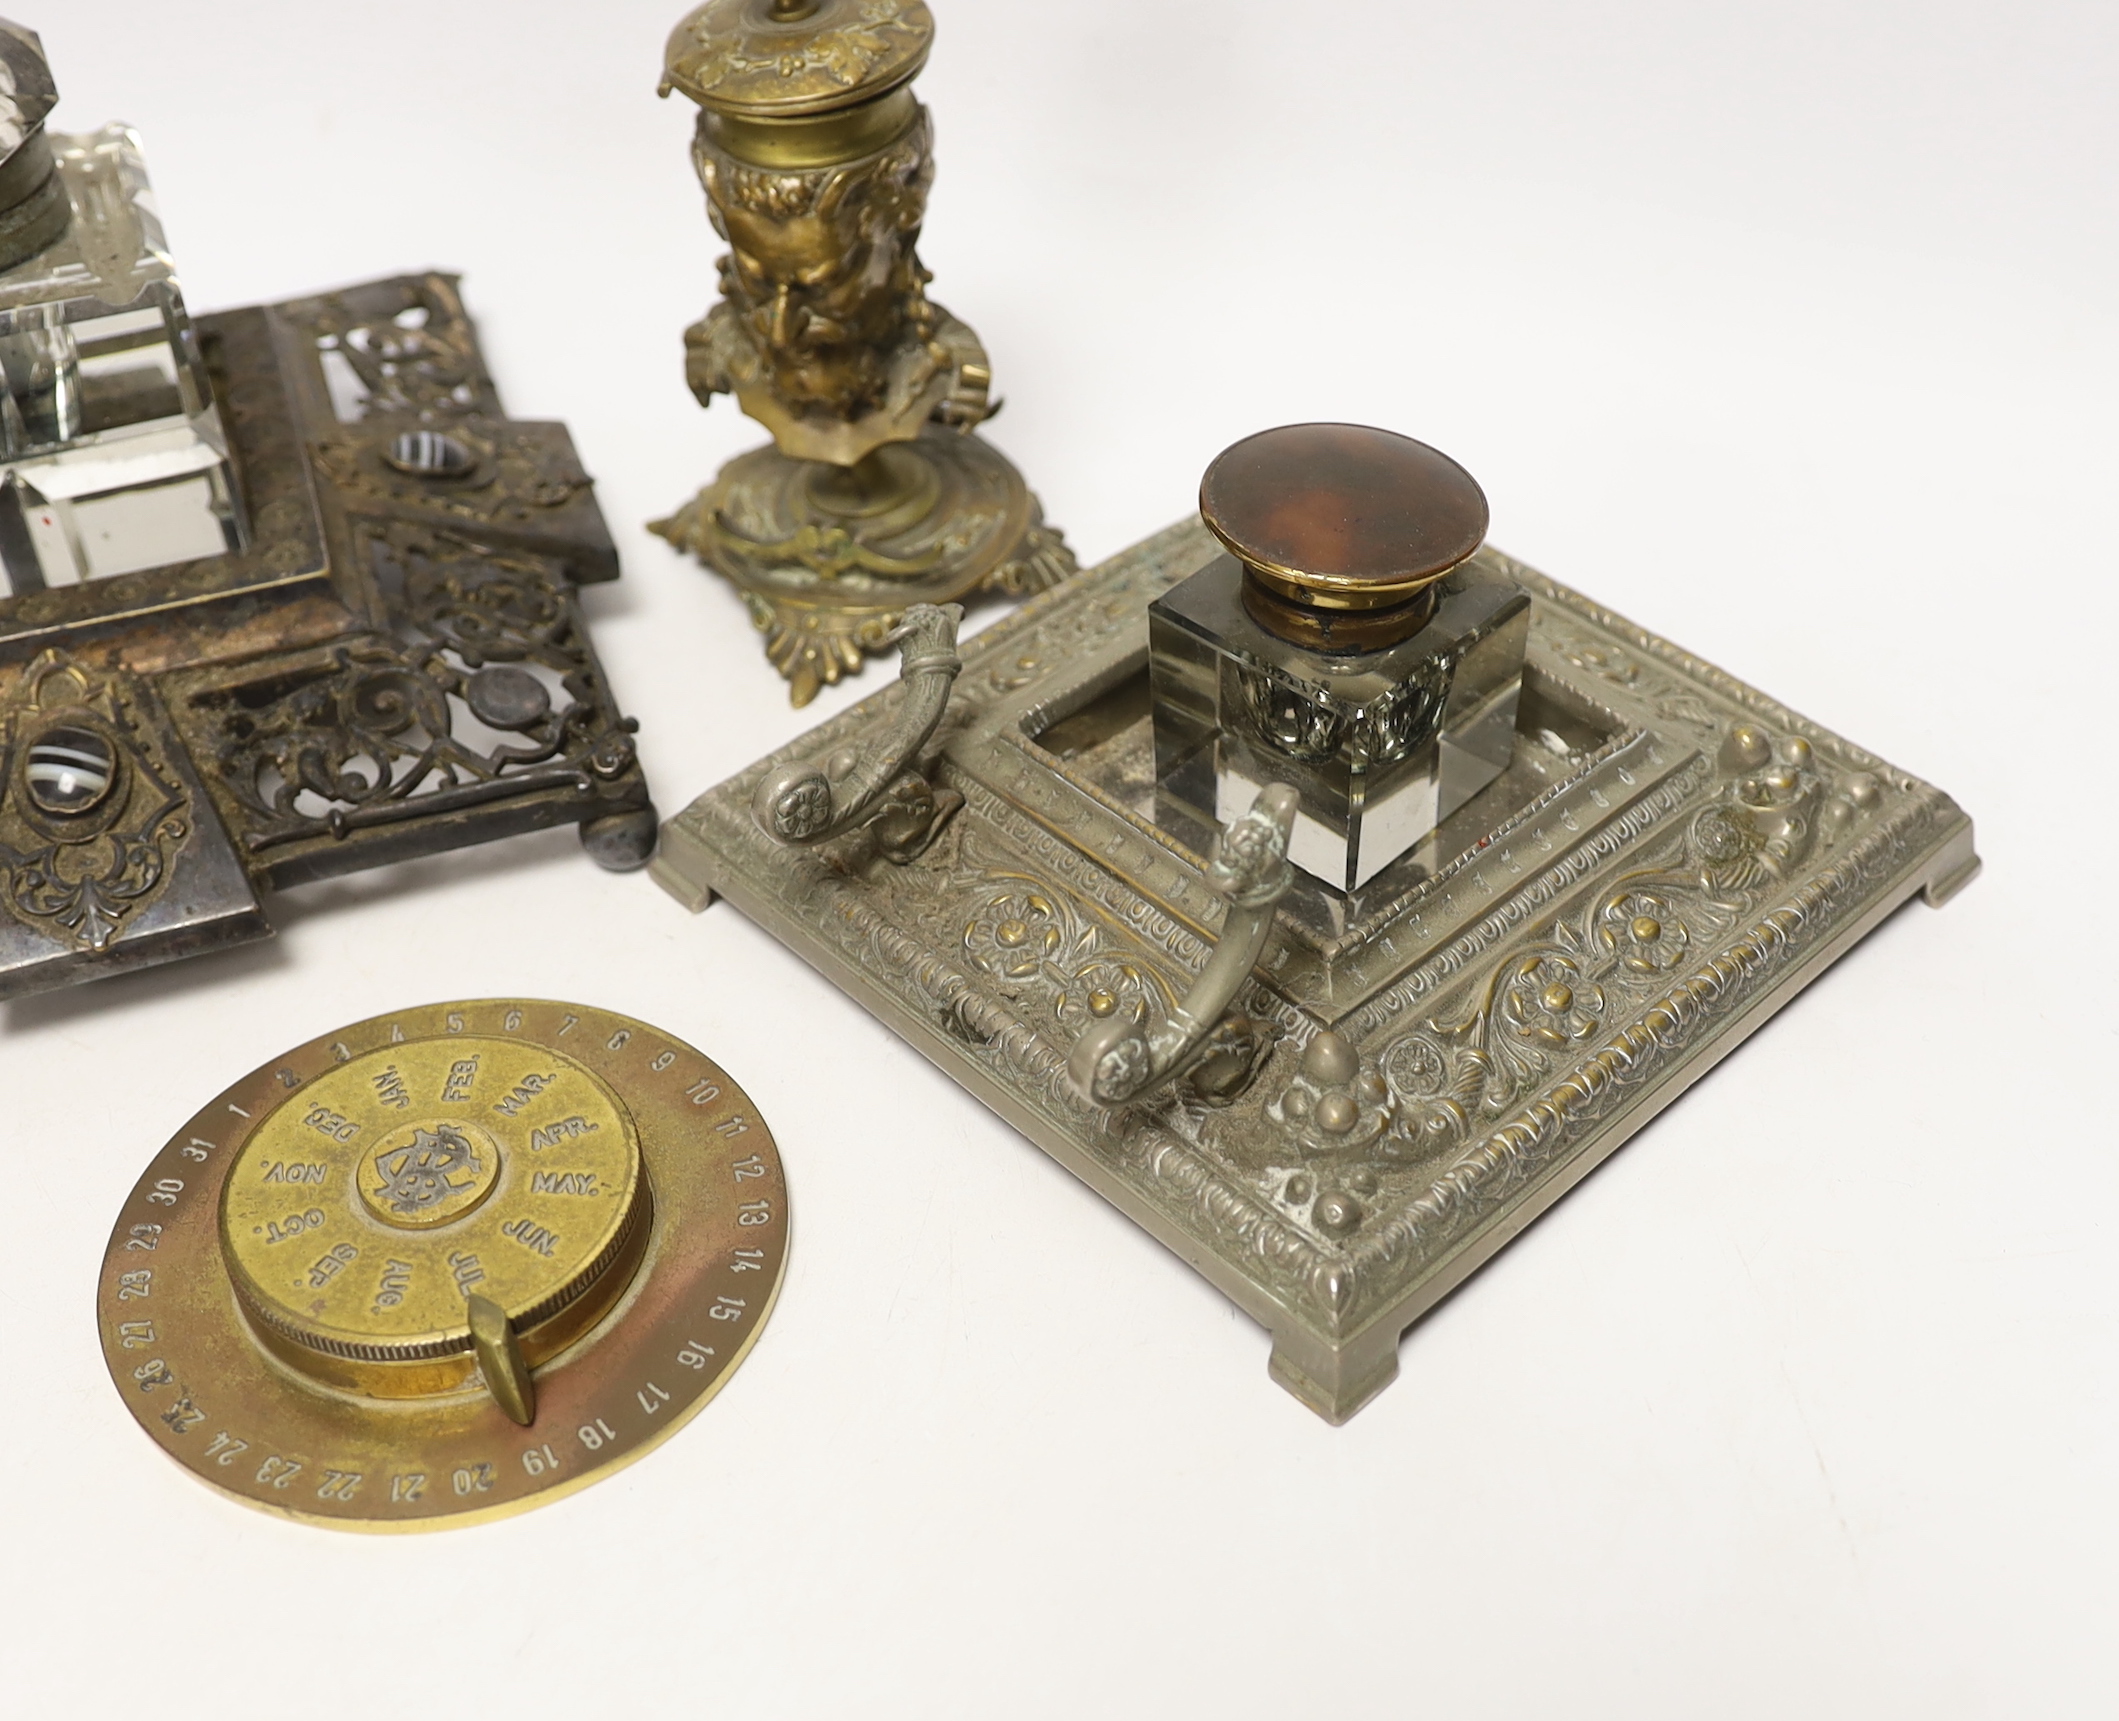 Three cast metal and cut glass ink stands, including a bronze inkwell in the form of the head of Bacus, and a brass calendar display from the Banca Commerciale Italiana, London Branch, tallest 13cm